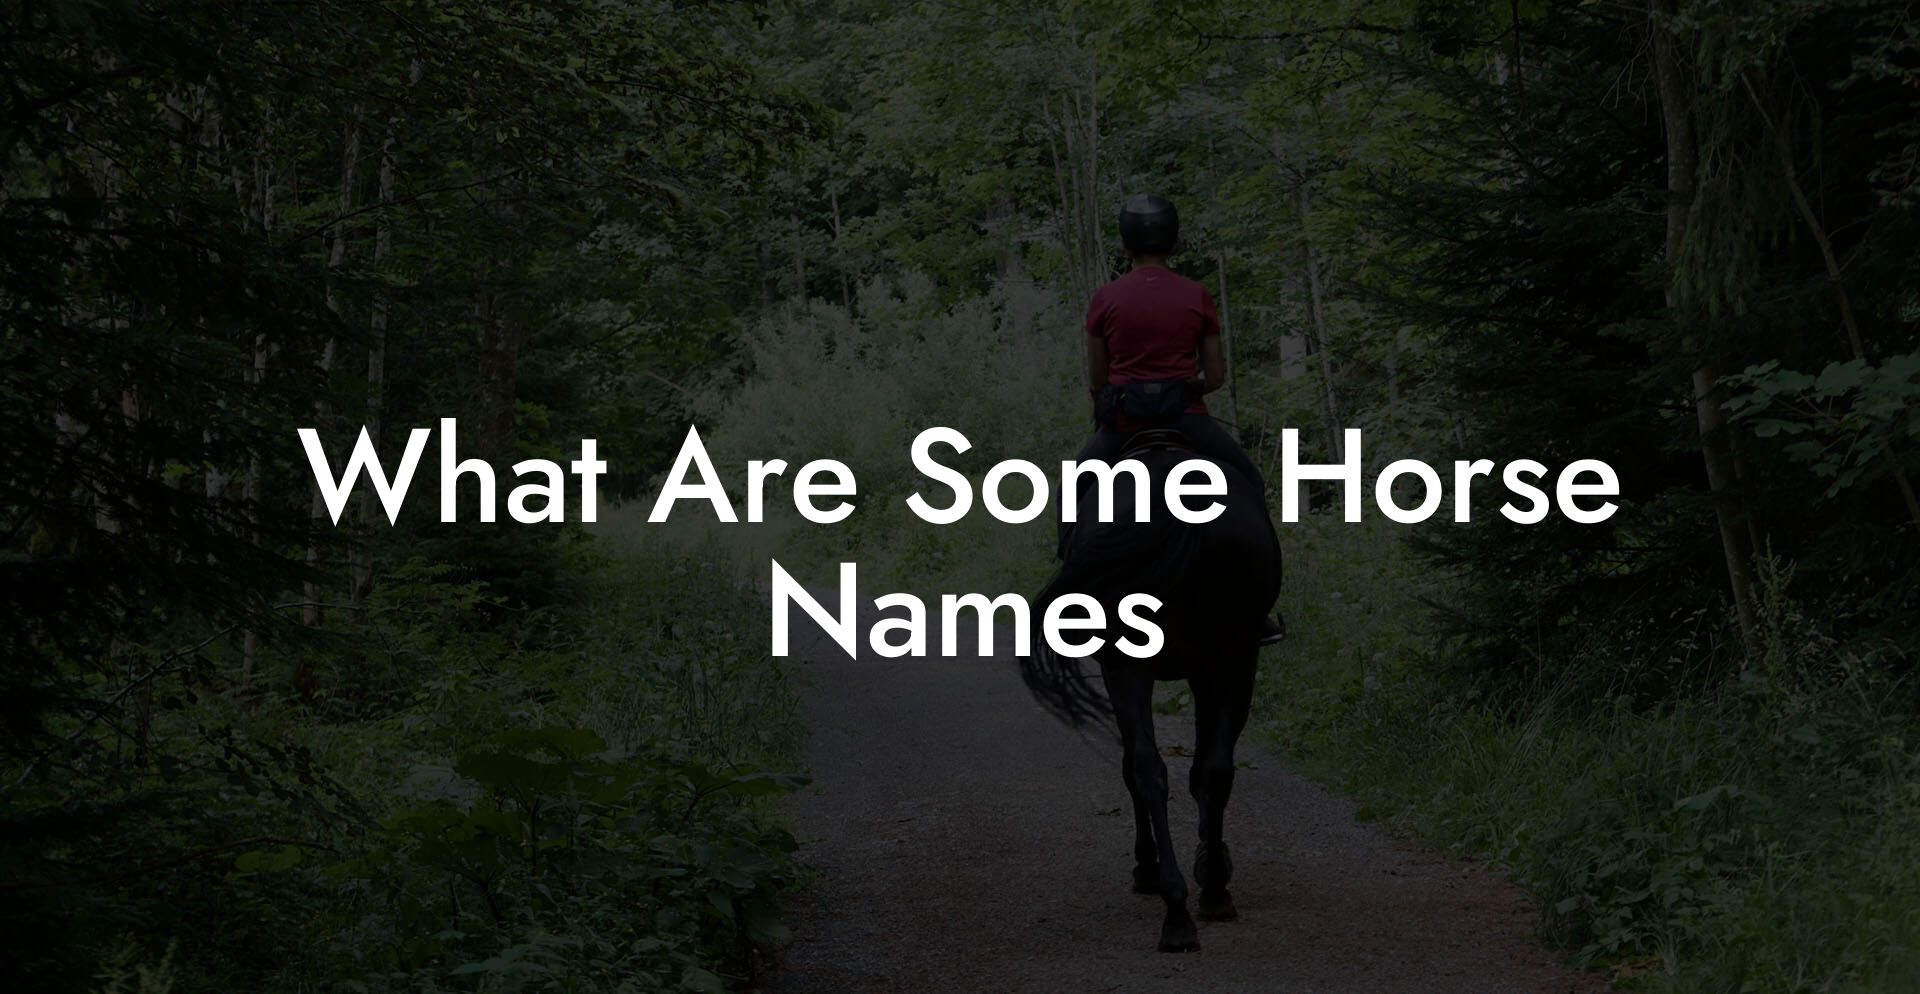 What Are Some Horse Names